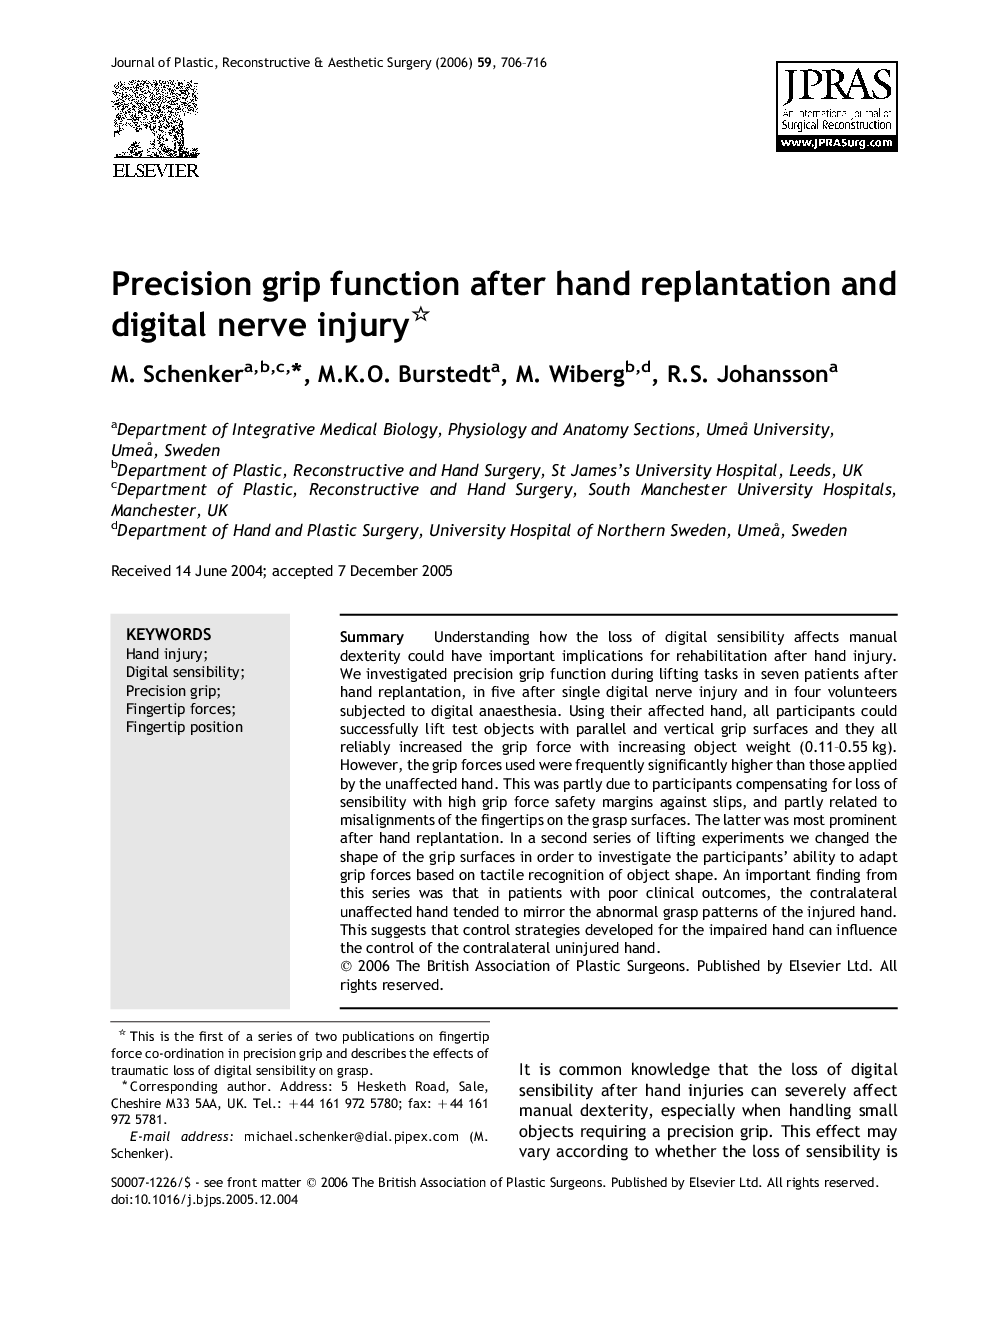 Precision grip function after hand replantation and digital nerve injury 